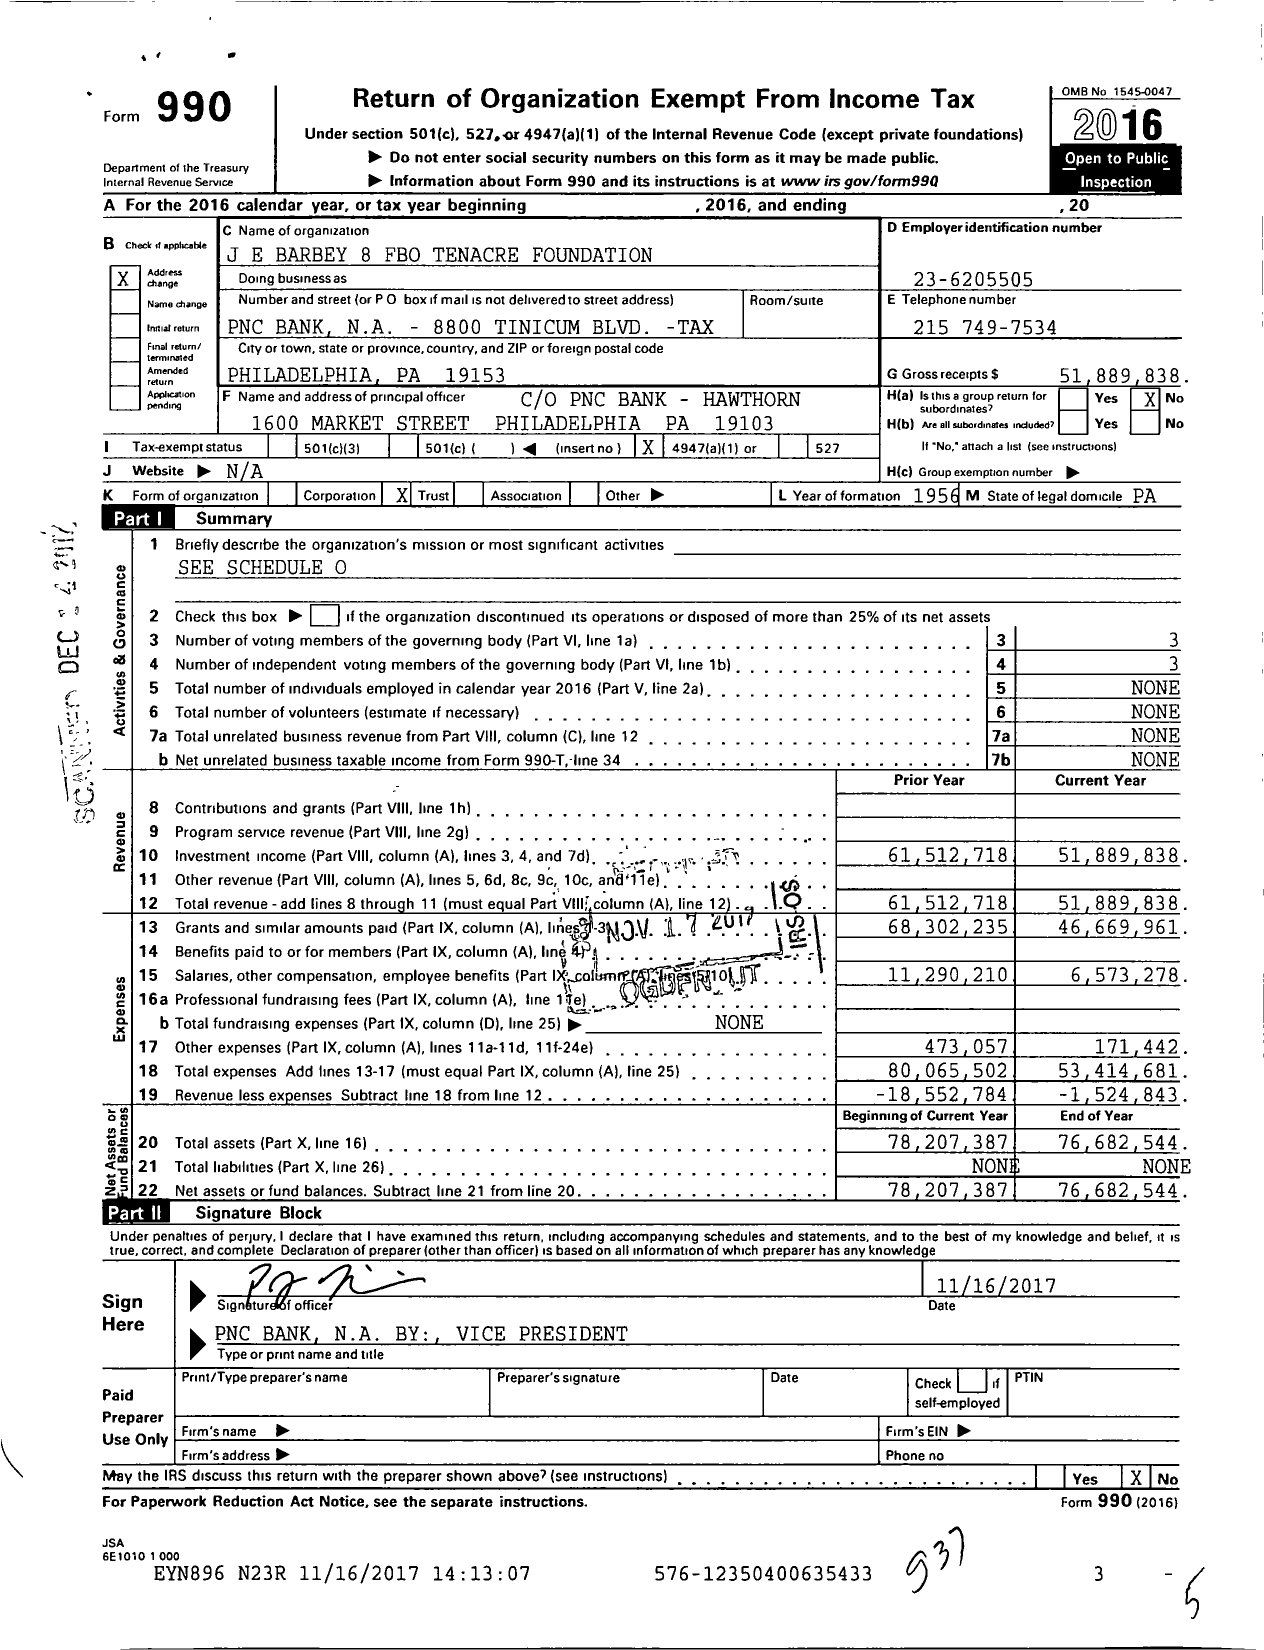 Image of first page of 2016 Form 990O for JE E Barbey 8 Fbo Tenacre Foundation